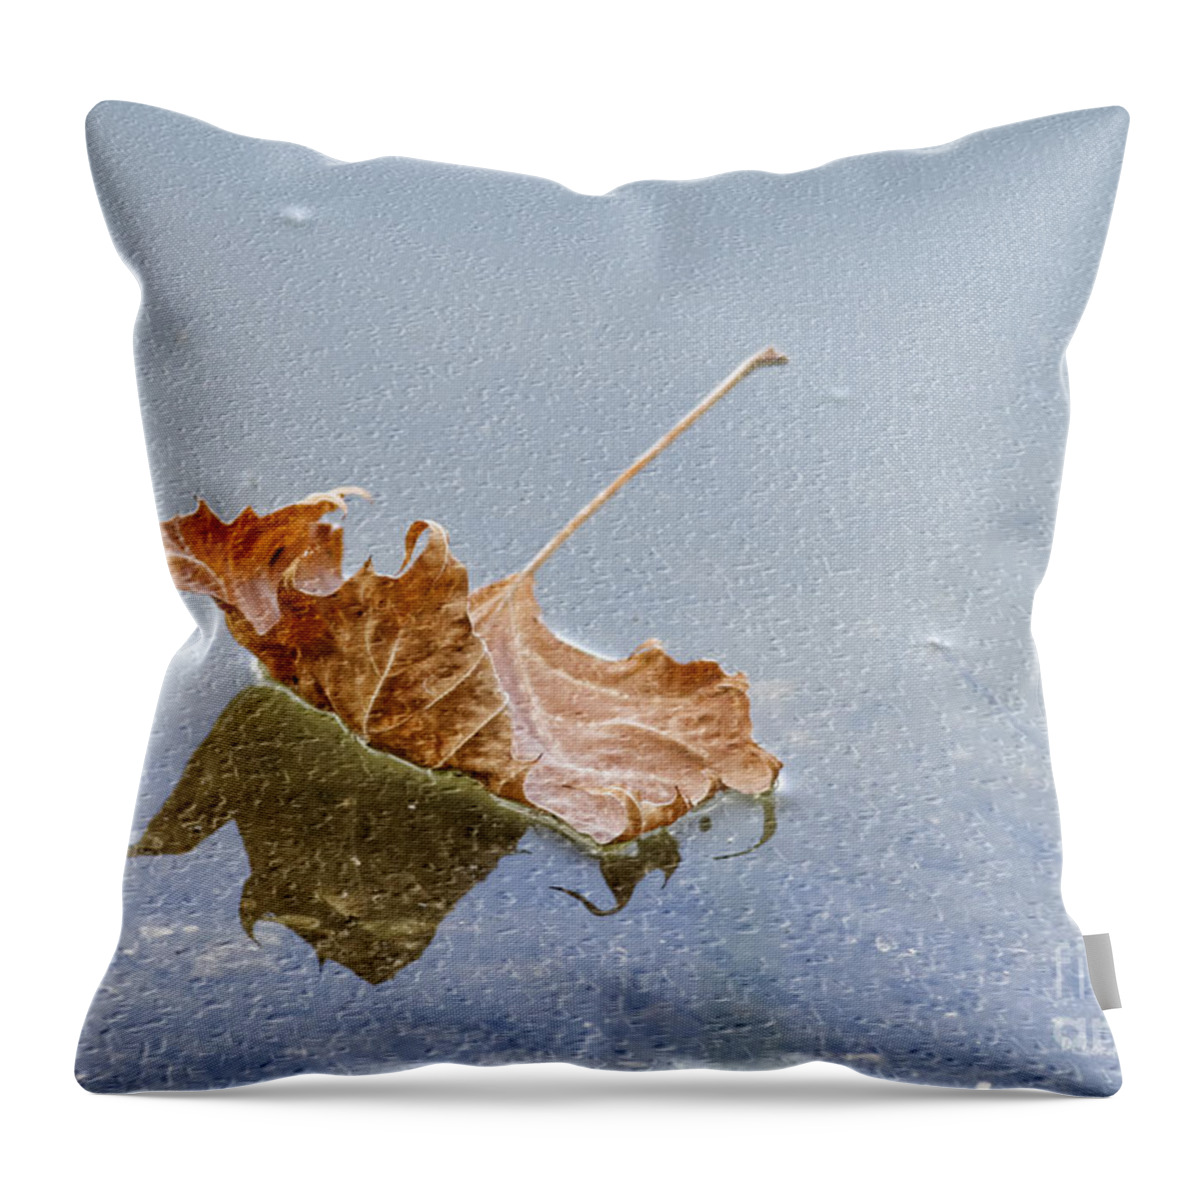 Leaf Throw Pillow featuring the photograph Floating Down Lifes Path 2 by Deborah Benoit